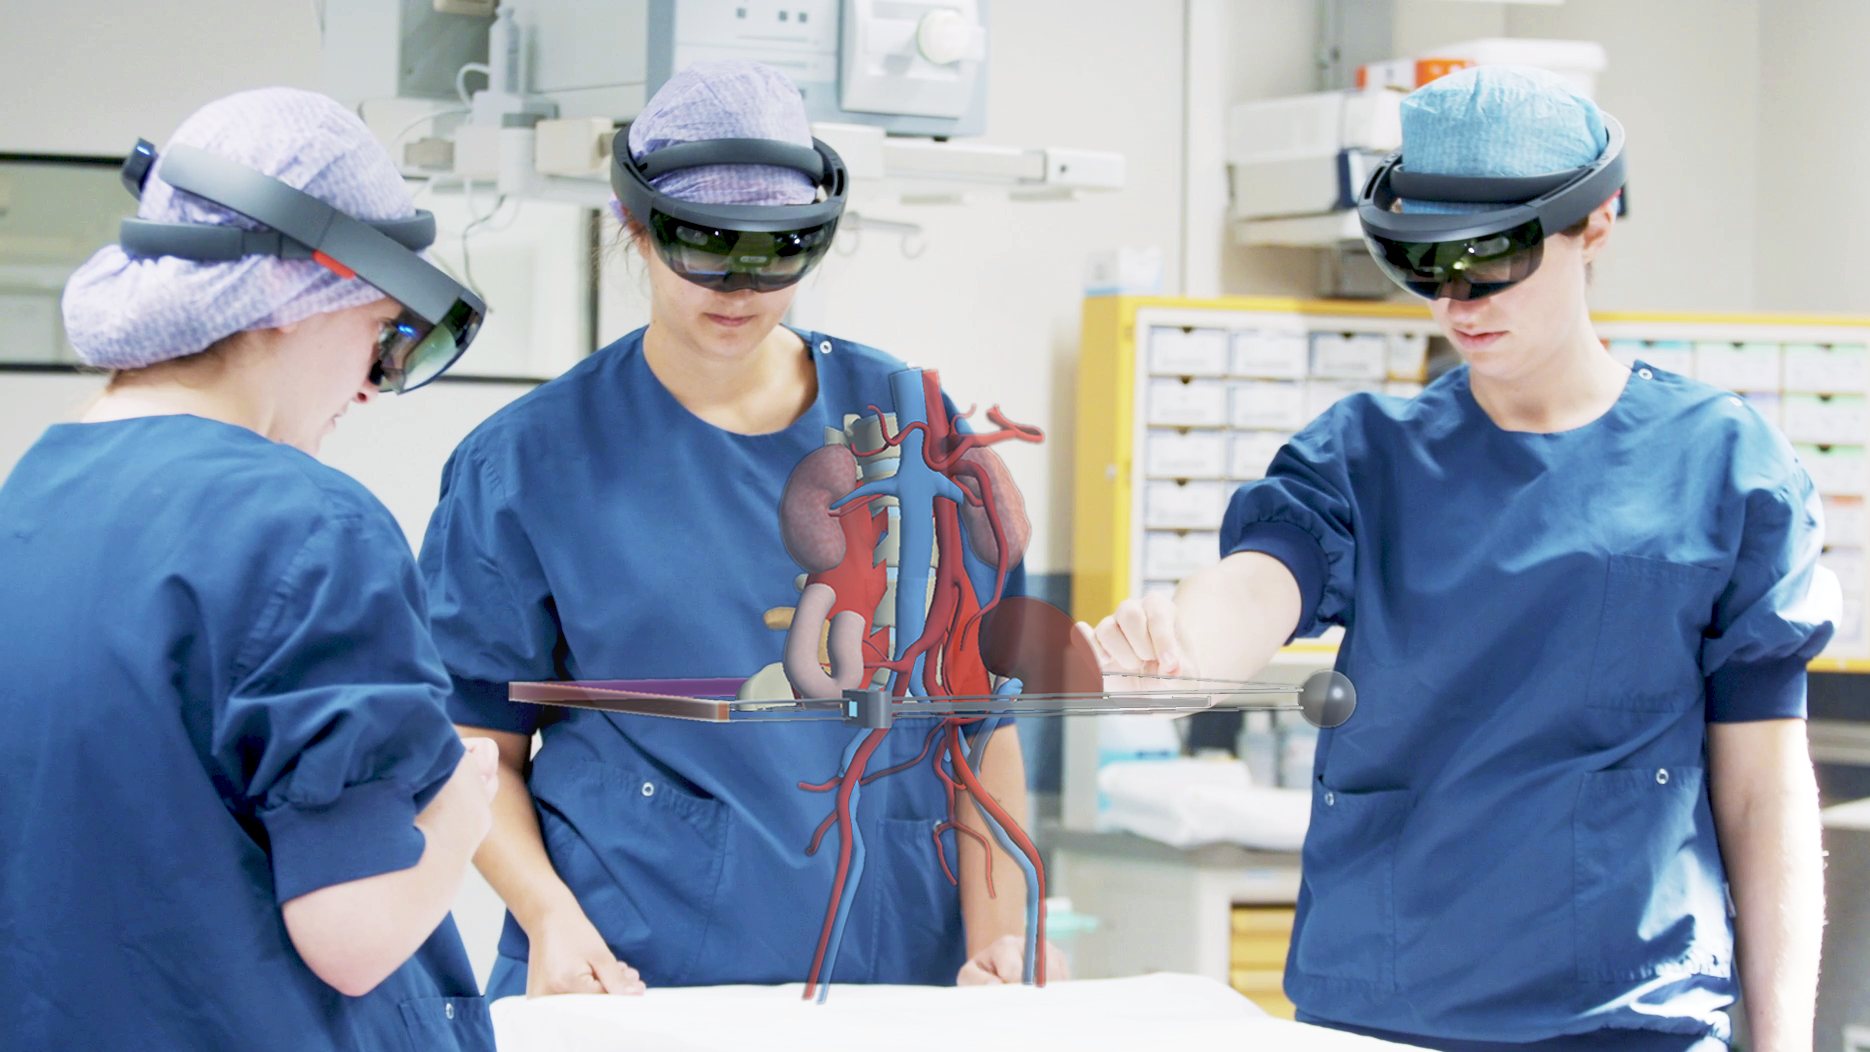 AugMedicine augmented reality learning